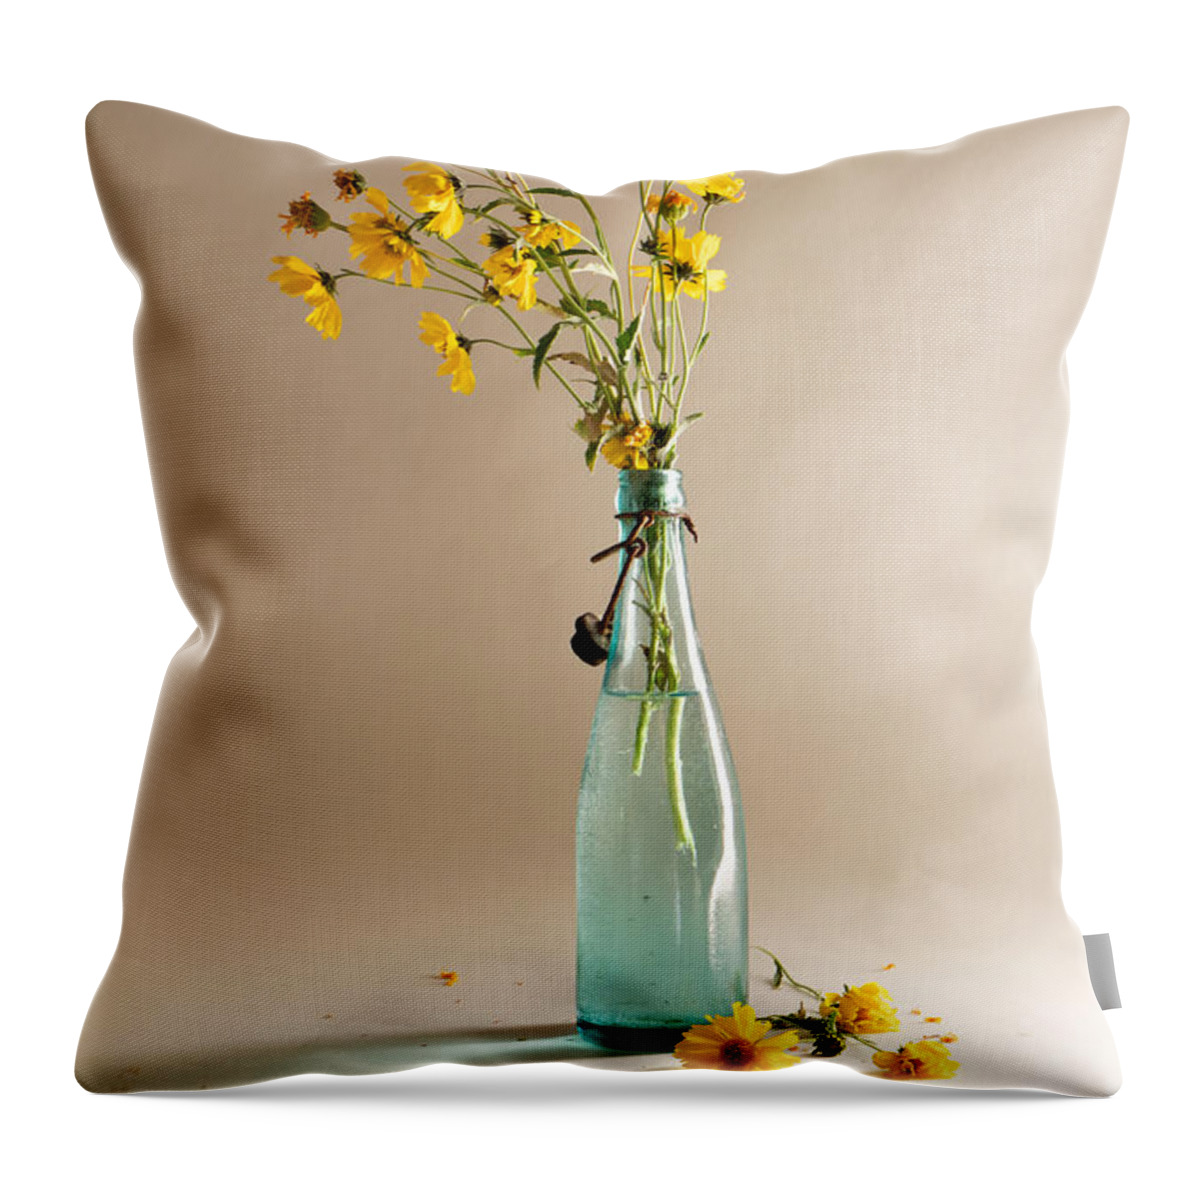 Still Life Throw Pillow featuring the photograph The Vase by Mary Lee Dereske